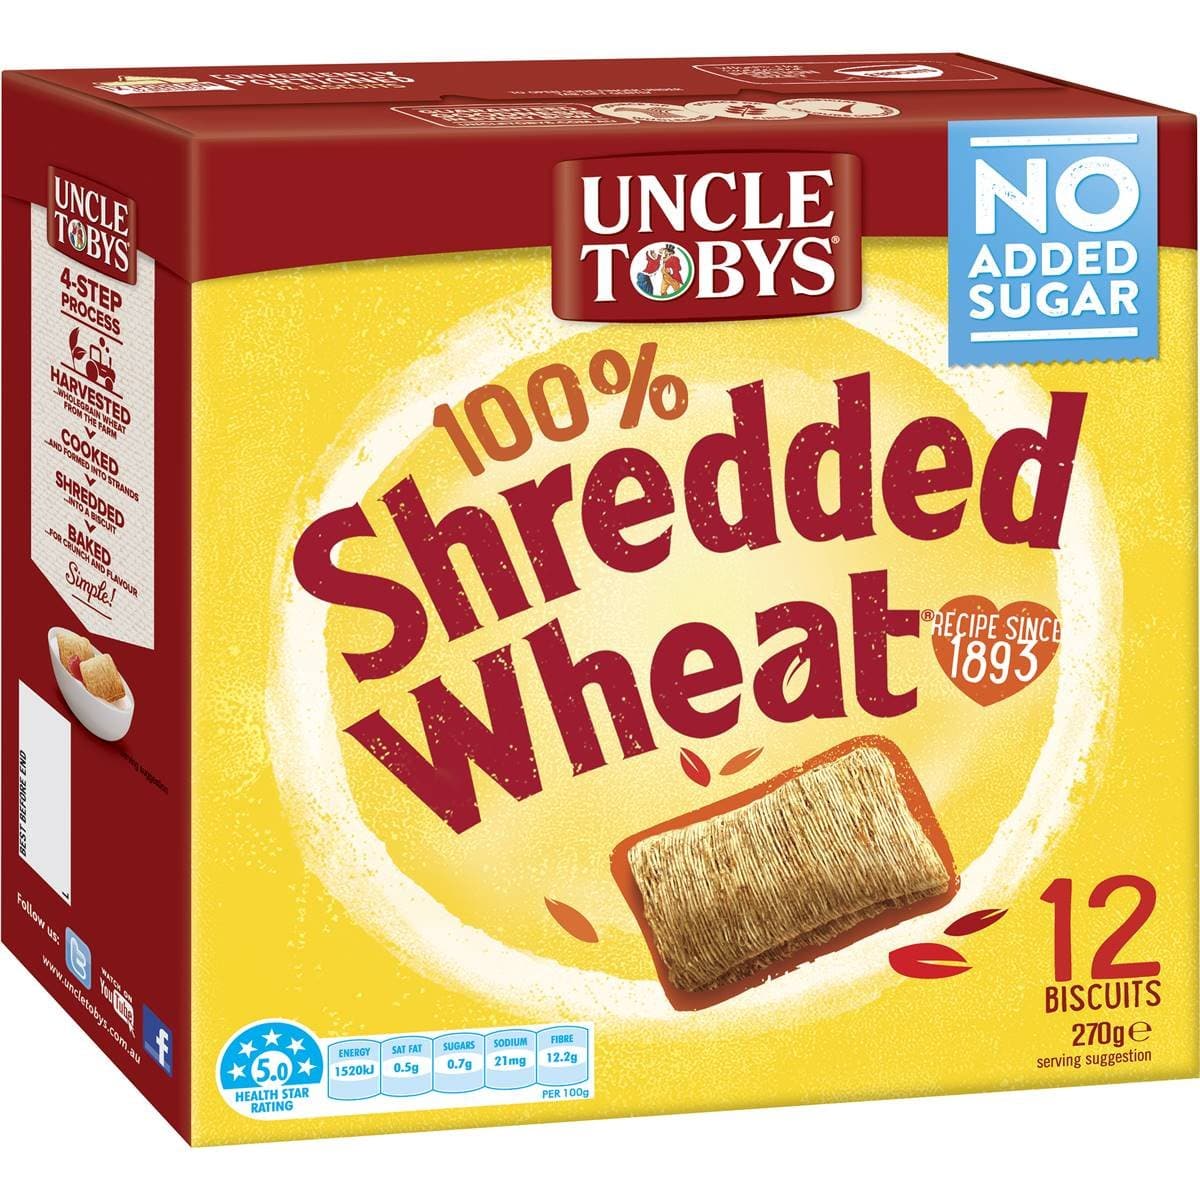 Uncle Tobys Shredded Wheat 360g